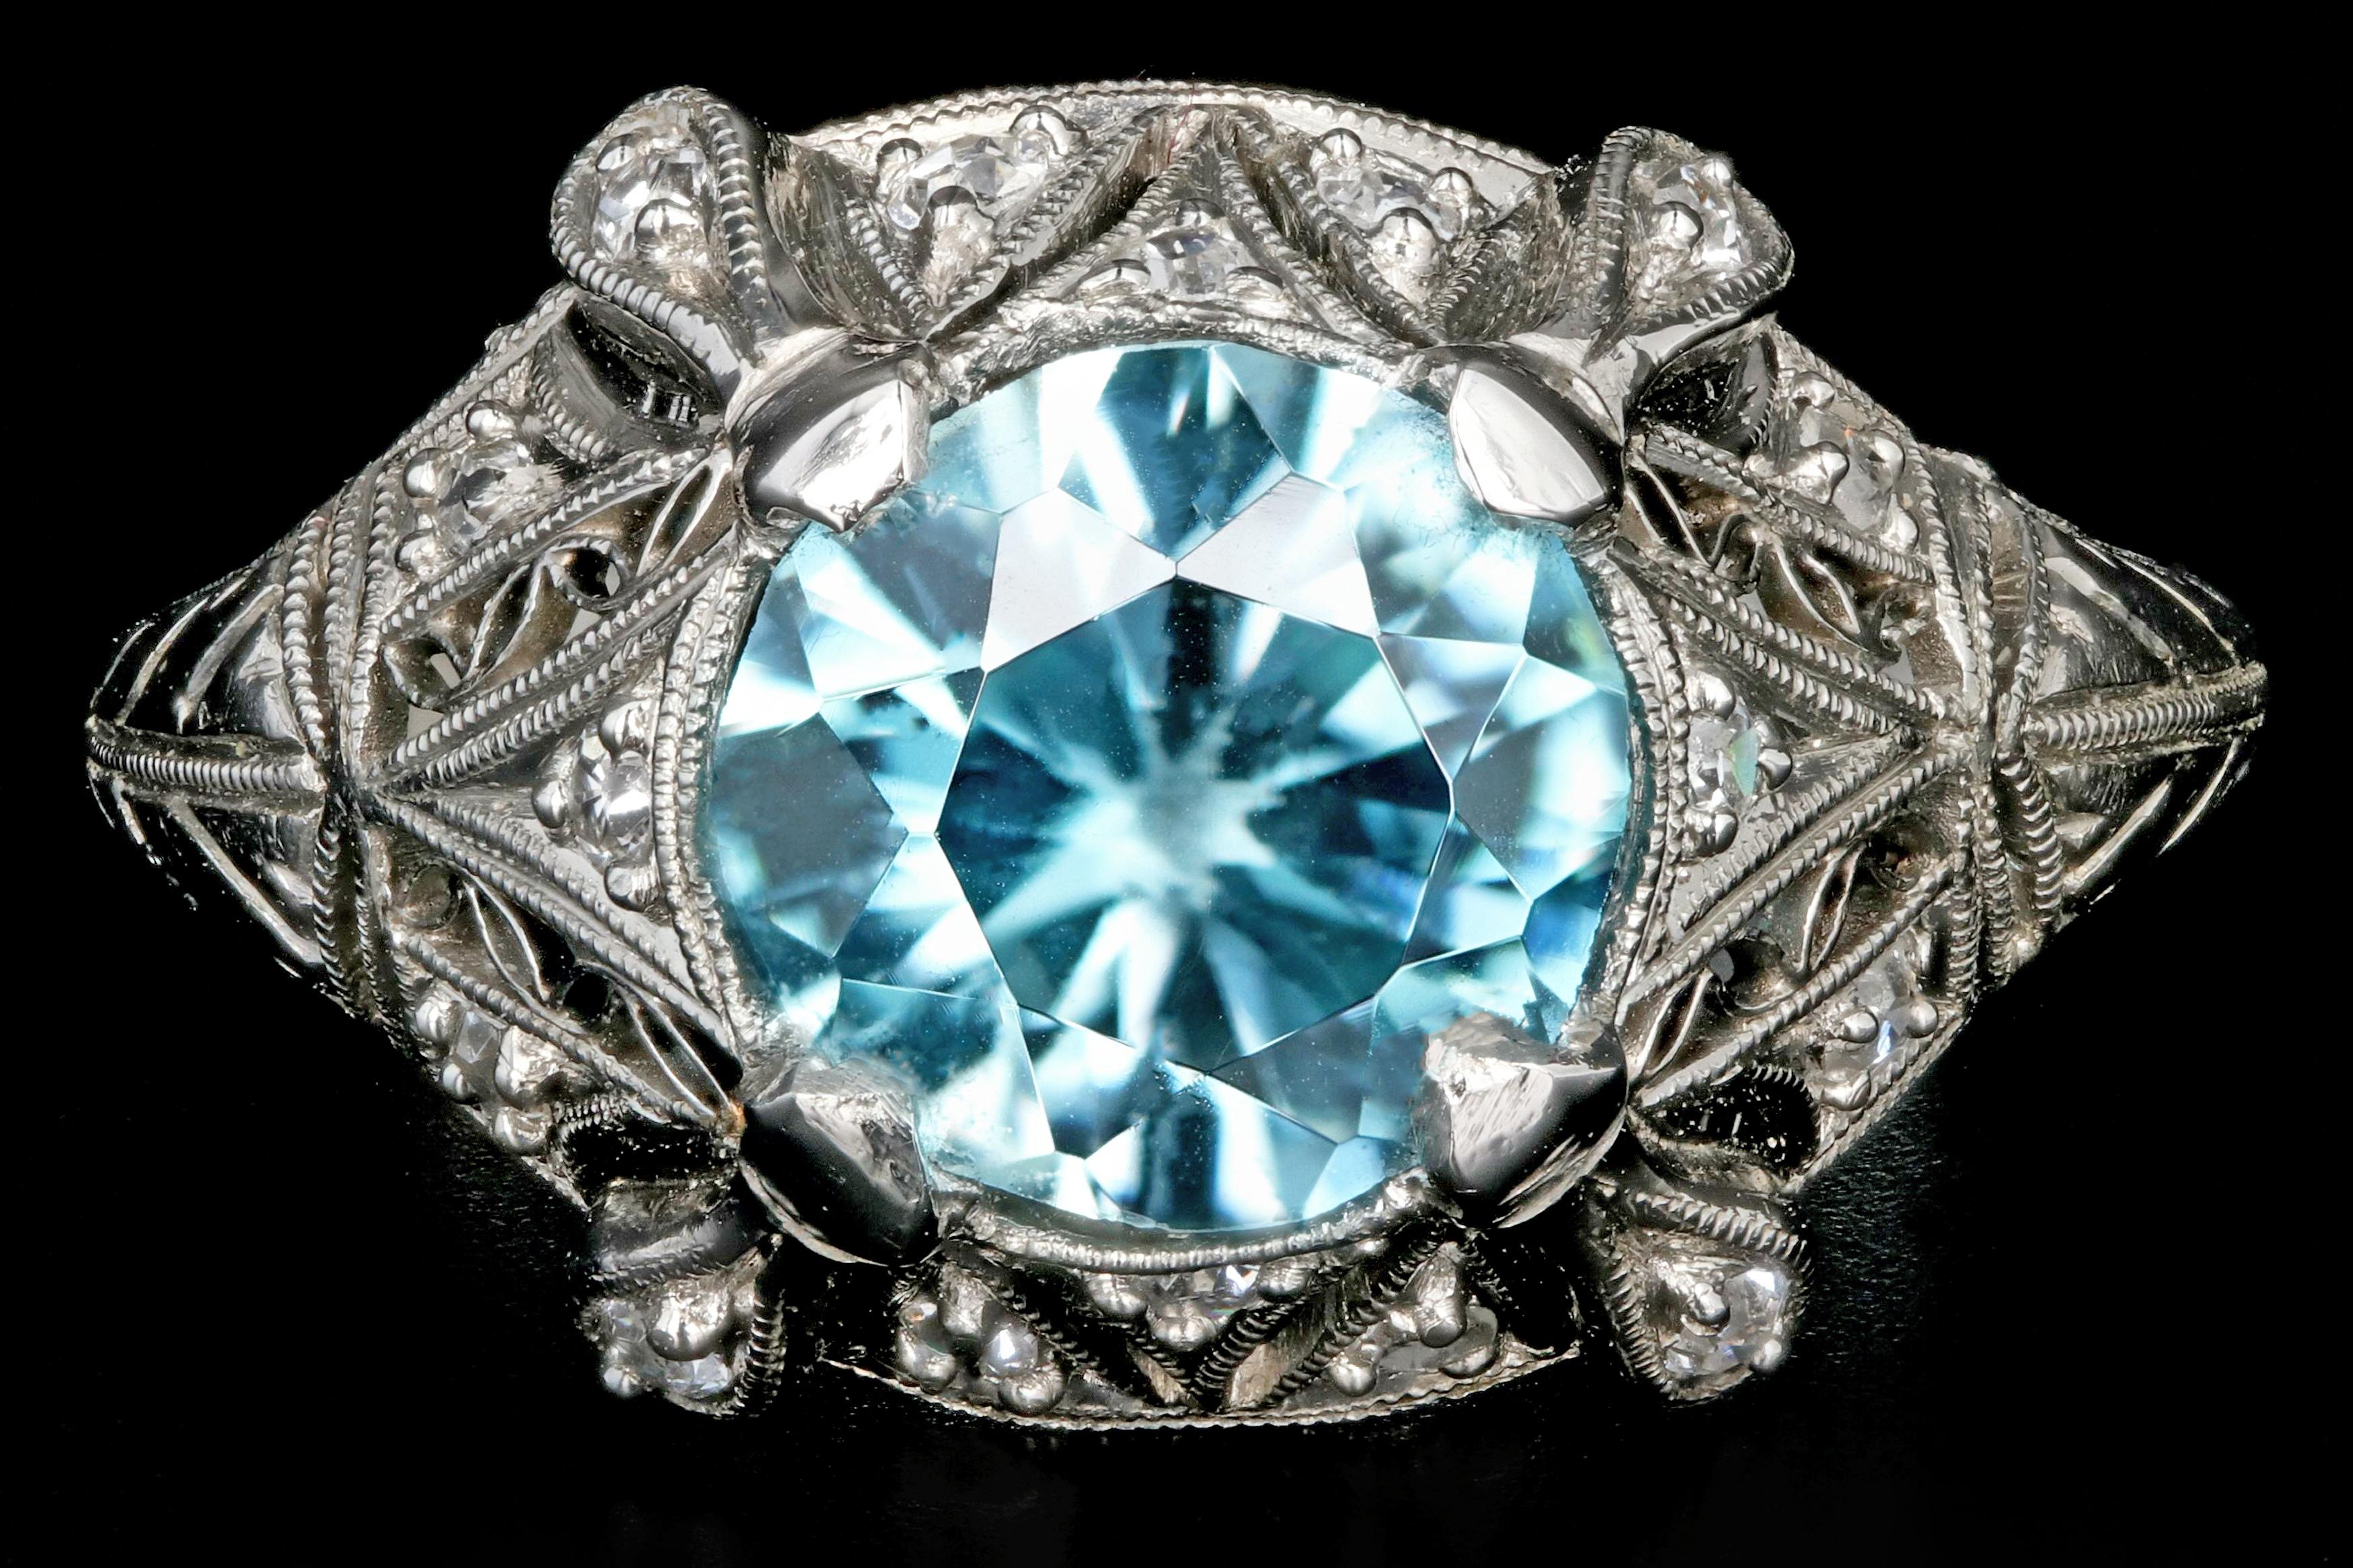 Era: Art Deco

Composition: Platinum

Primary Stone: Round Brilliant Cut

Carat Weight: 2.1CT Blue Zircon

Secondary Stone: Single cut diamonds

Carat Weight: Approximately .15ctw

Color: G/H

Clarity: Si1/2

Ring Weight: 4.9 grams

Ring Size: 5.5 